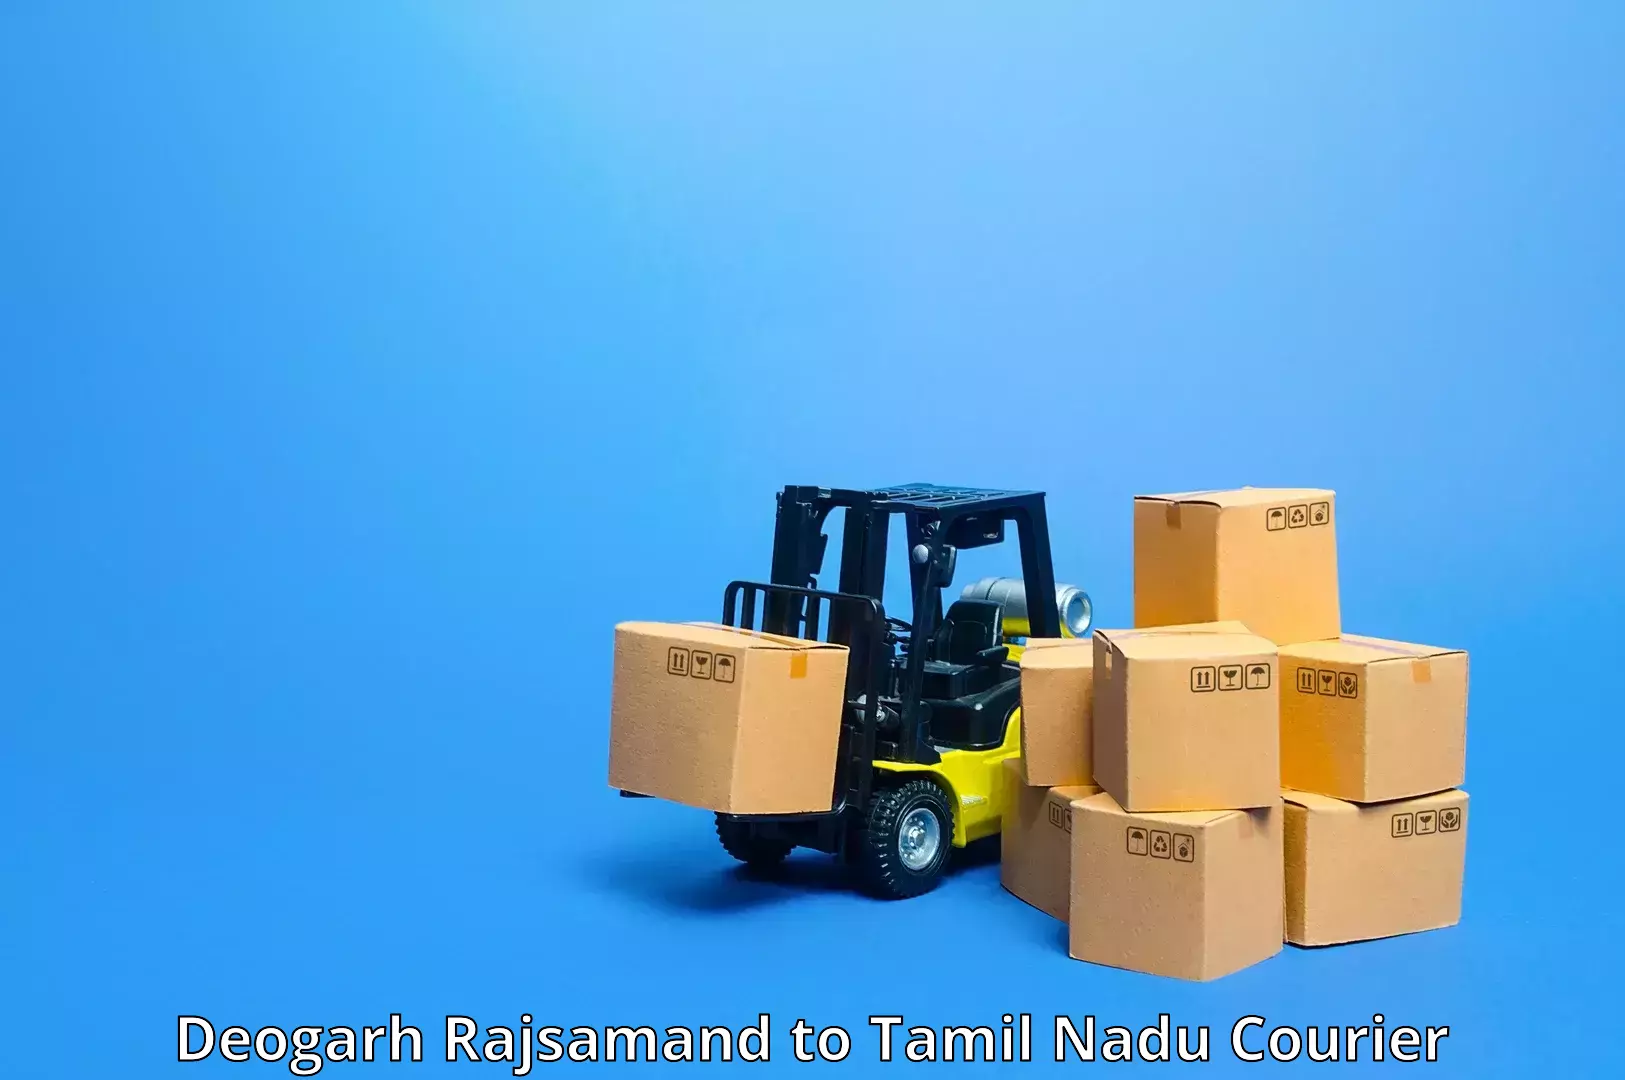 Advanced package delivery Deogarh Rajsamand to Ennore Port Chennai